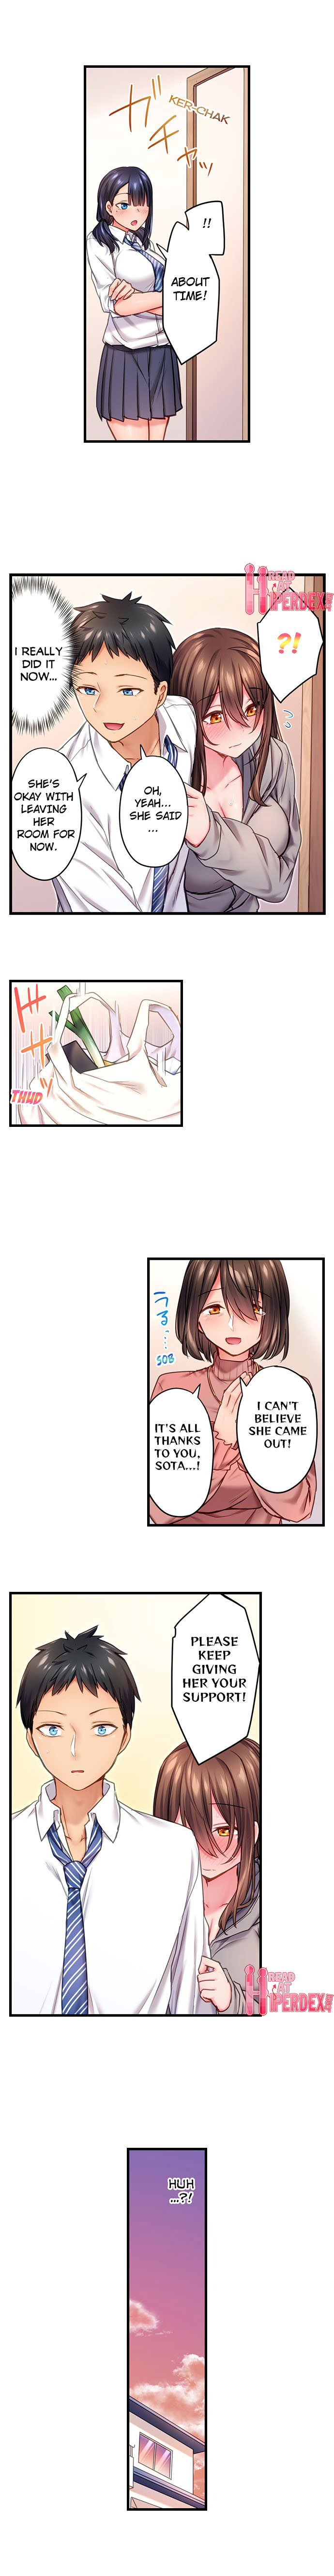 cant-believe-my-loner-childhood-friend-became-this-sexy-girl-chap-3-8